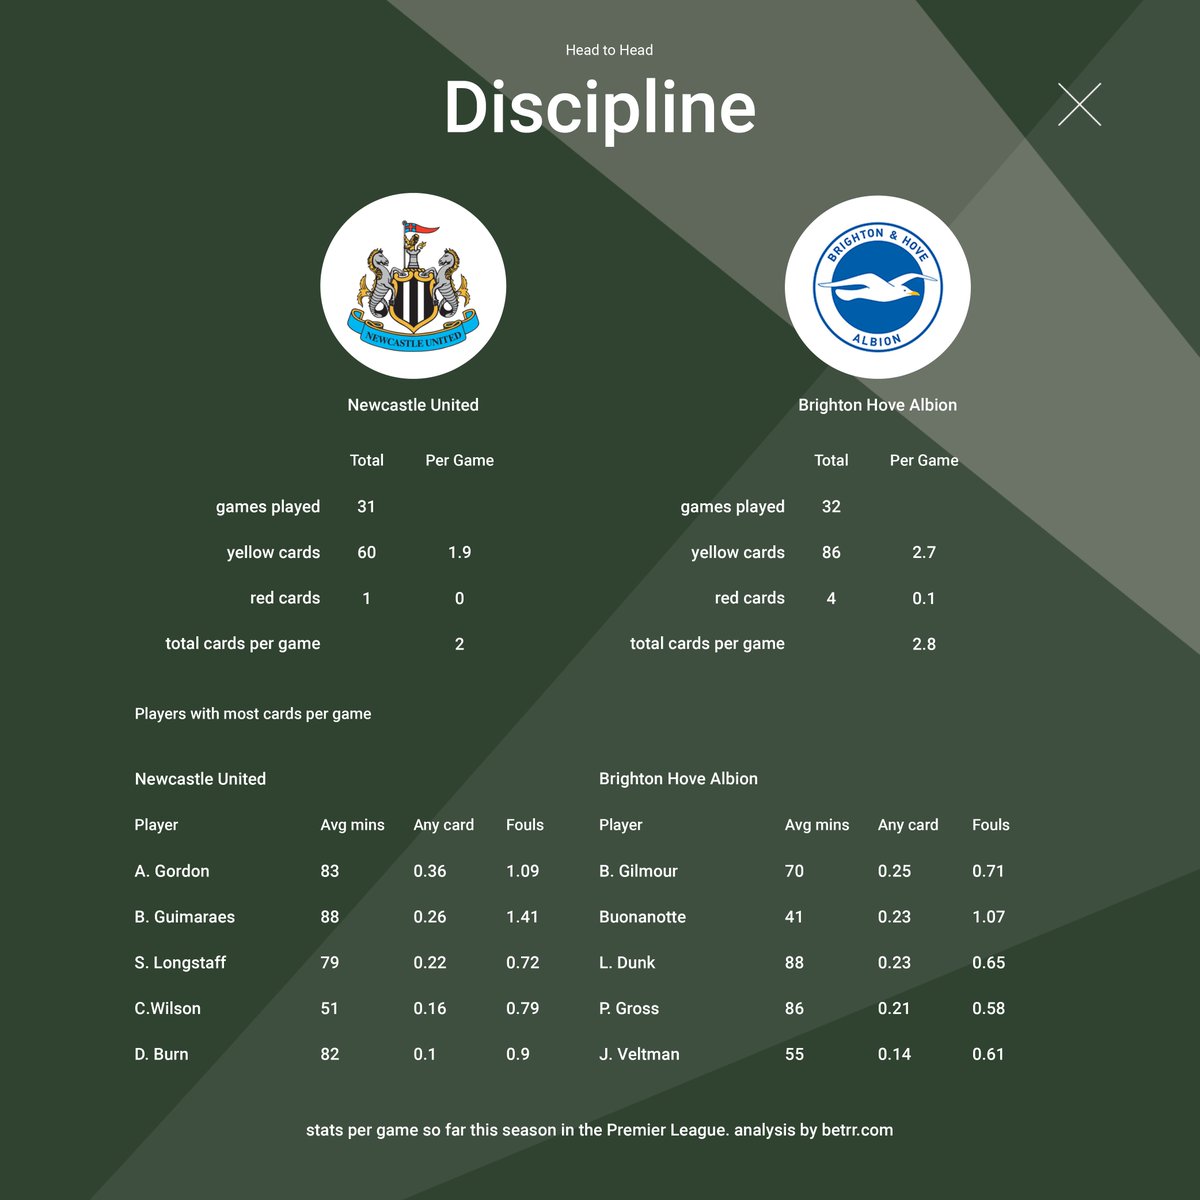 Take a look at the complete head-to-head breakdown of player discipline Newcastle v Brighton. 
Full match preview at: ow.ly/14iI50Rzyzv #NEWBRH #PremierLeague #nufc #toonarmy #nufcfans #theseagulls #bhafc #brightonfc

Look for over 4.5 total cards at odds of about 2.00